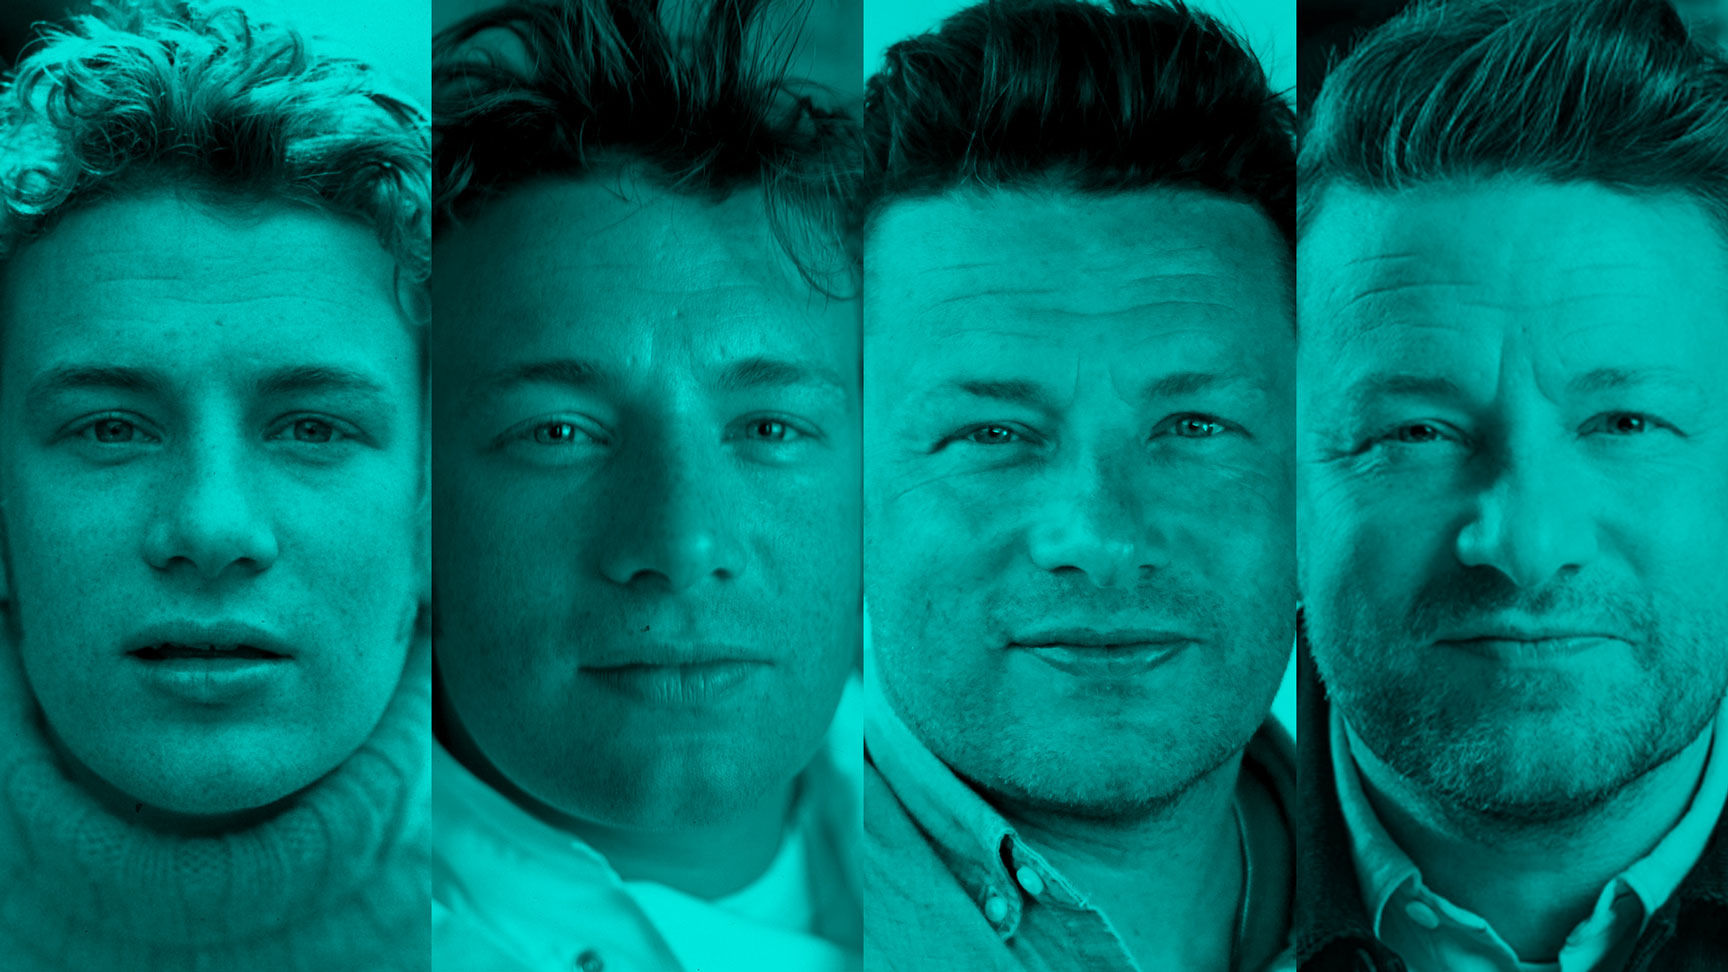 Four portrait images of Jamie's face looking directly at the camera from his days as the Naked Chef up to now.